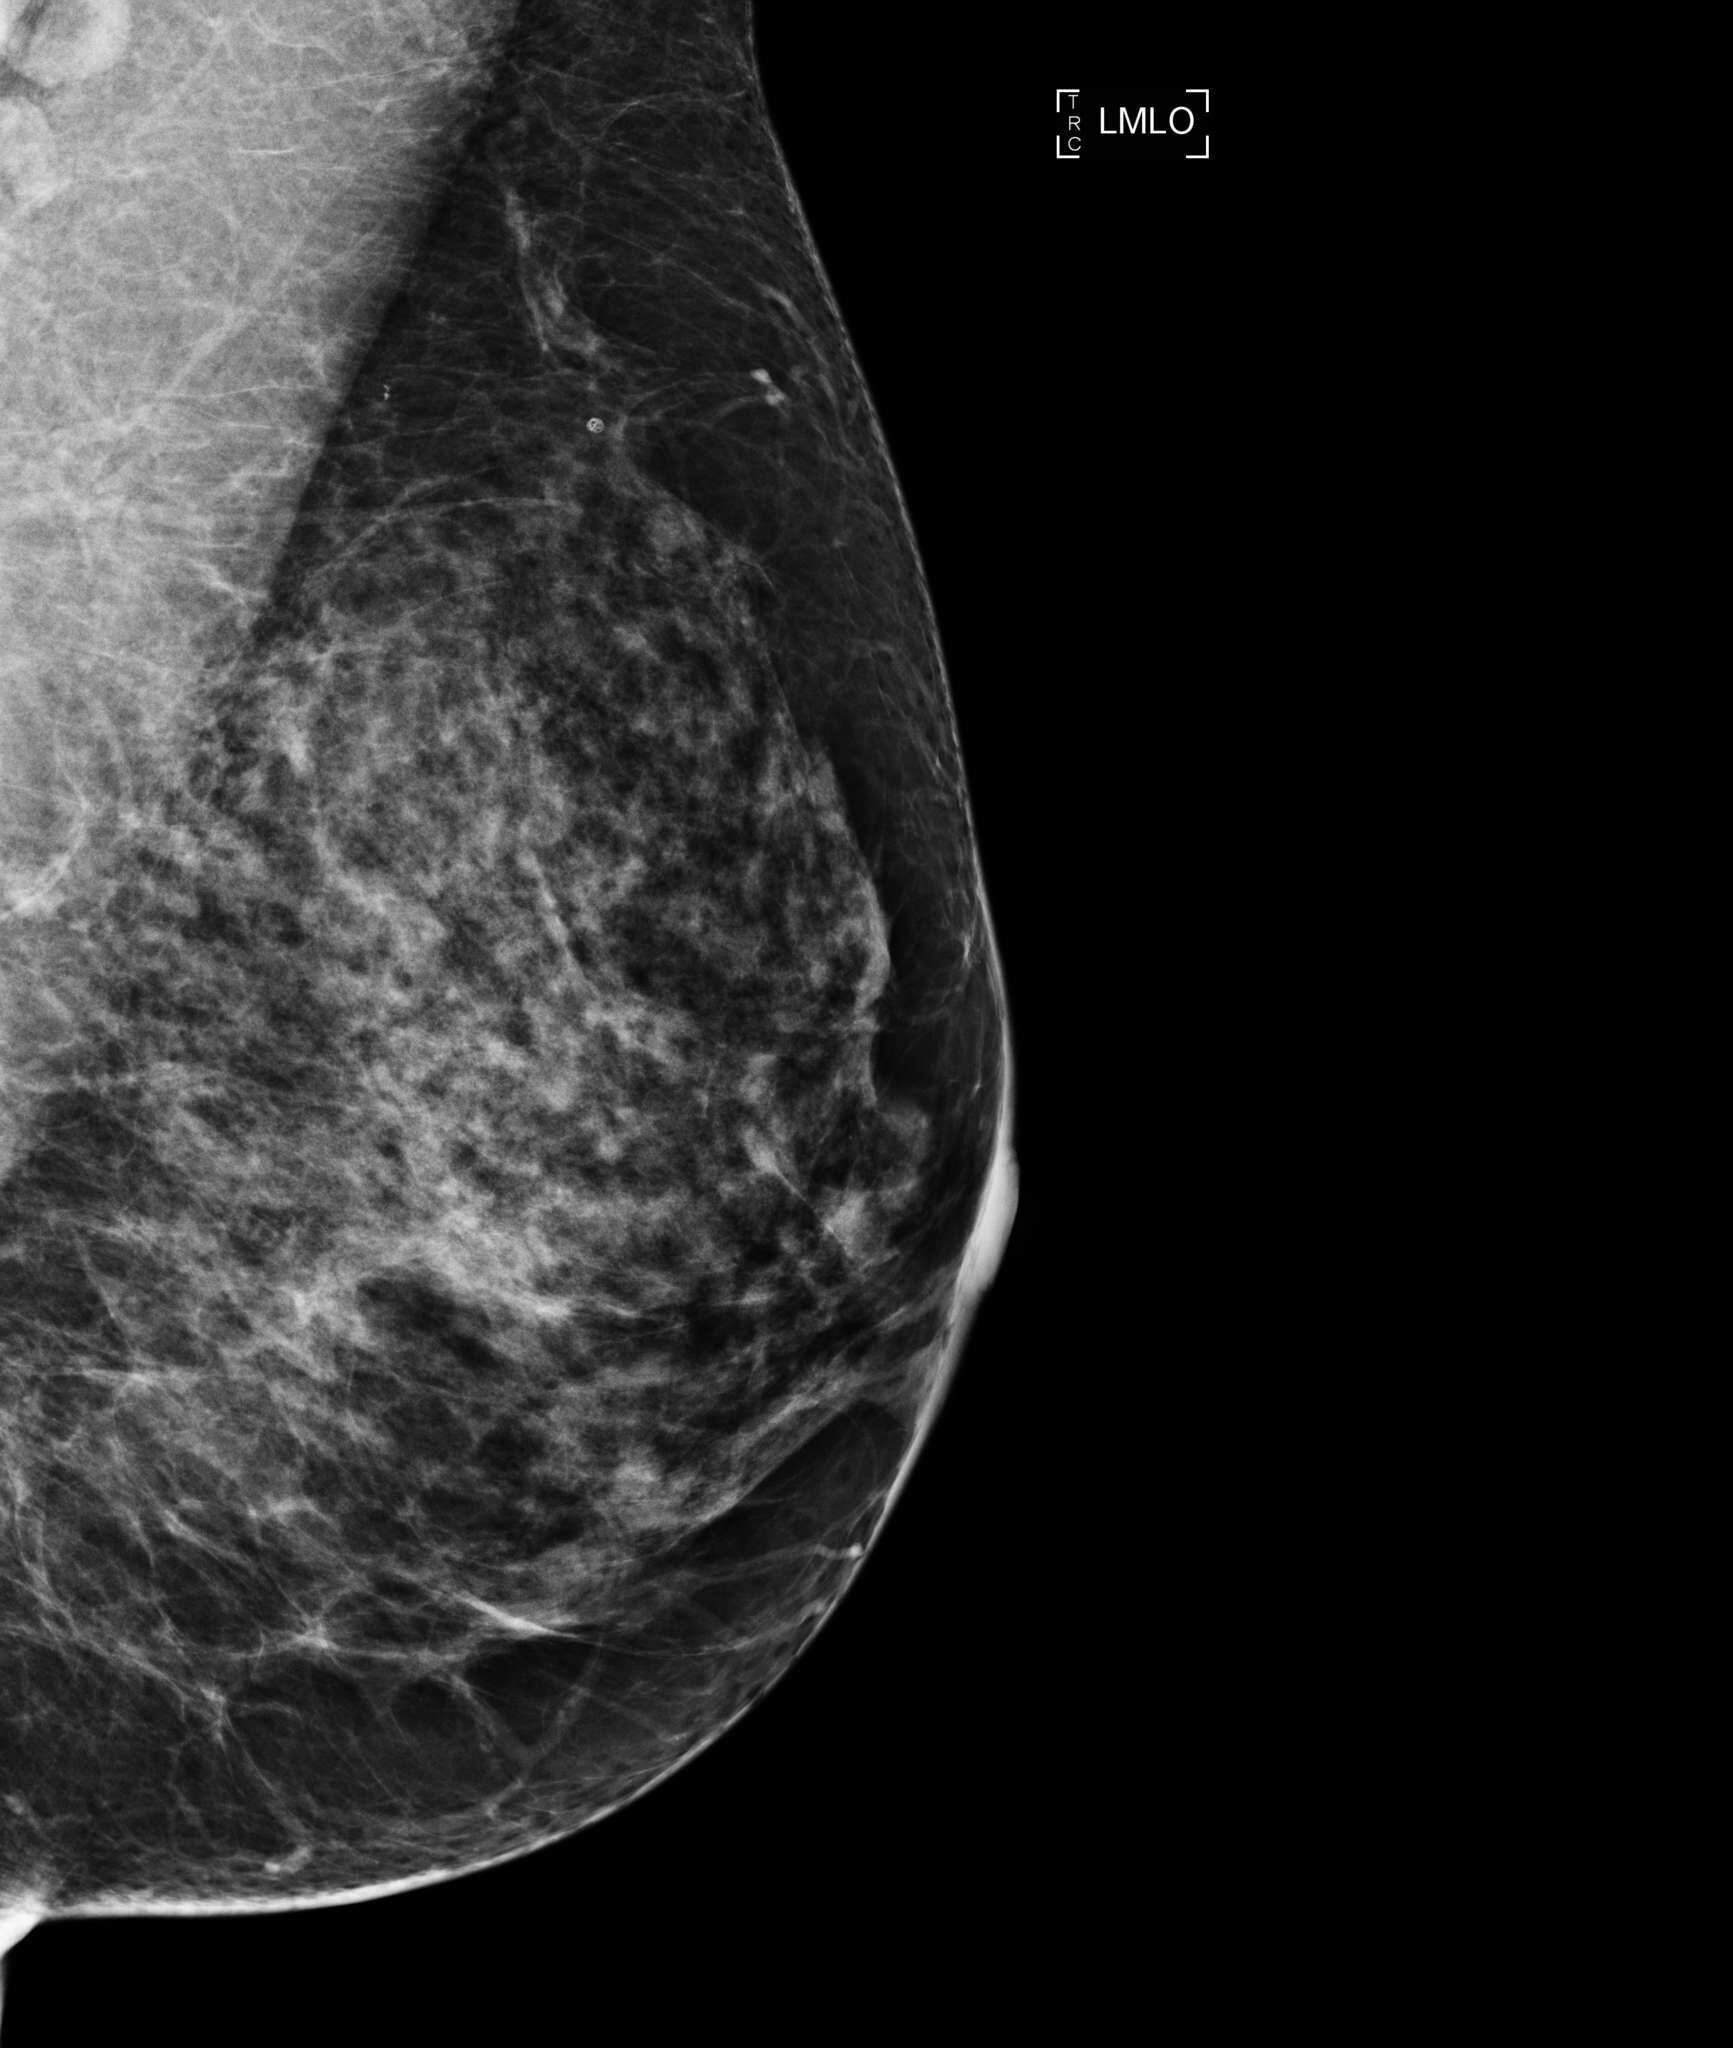 Dense breasts on a mammogram? What to know and do - Harvard Health